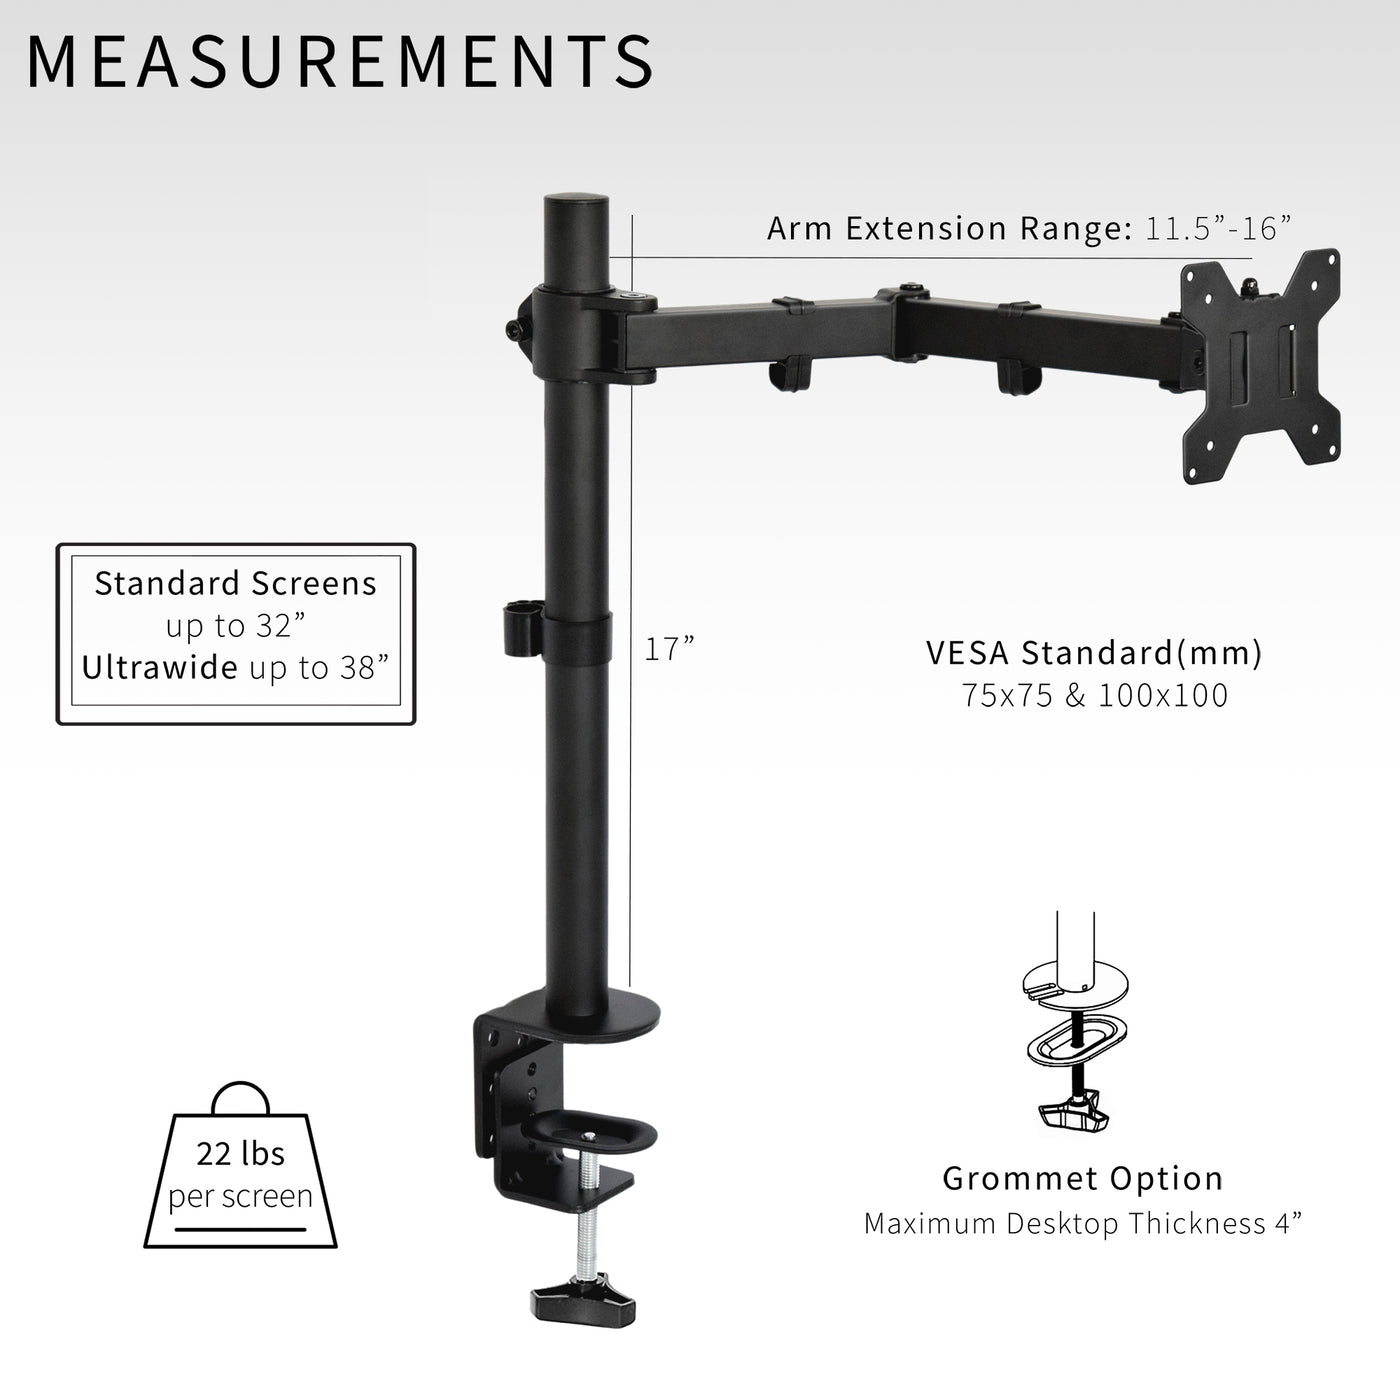 Single monitor desk mount from VIVO with articulation and cable management.